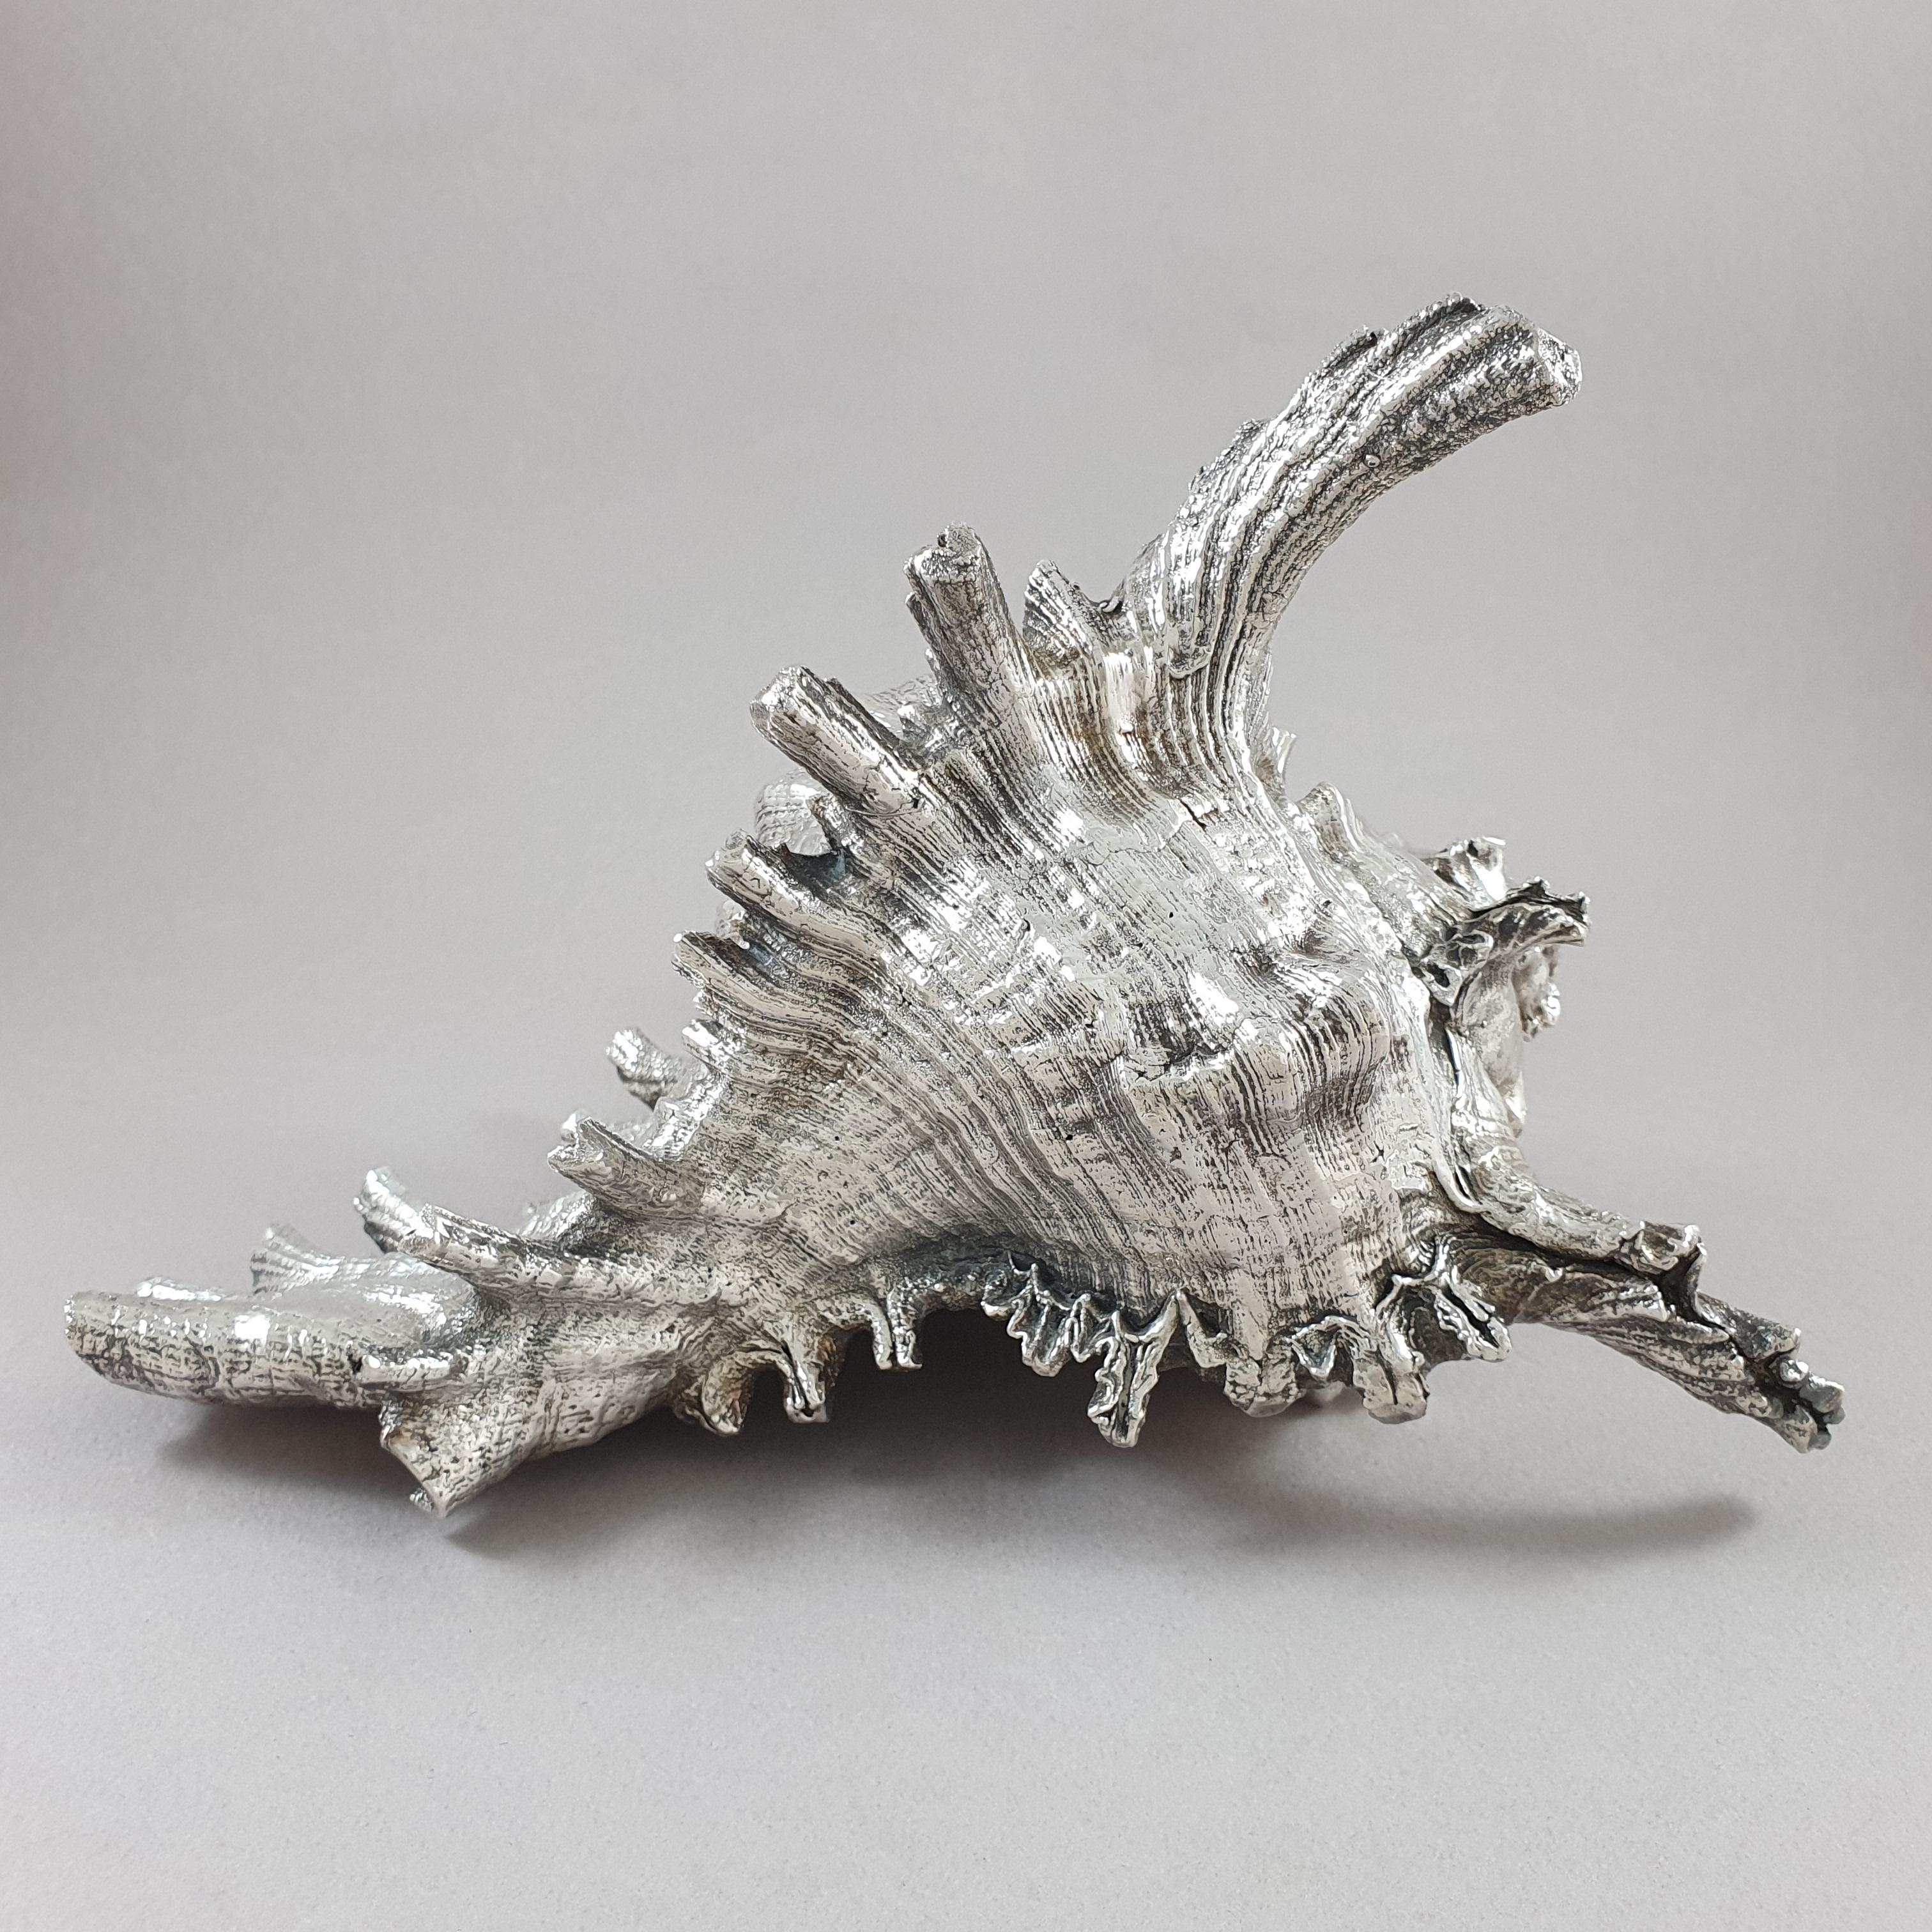 Buccellati shell mounted in 999/1000 pure Sterling Silver 

Measures: Length: 21.5 cm - 8.4 inches
Width: 16.5 cm - 6.5 inches
Height: 14.5 cm - 5.7 inches

Perfect condition.